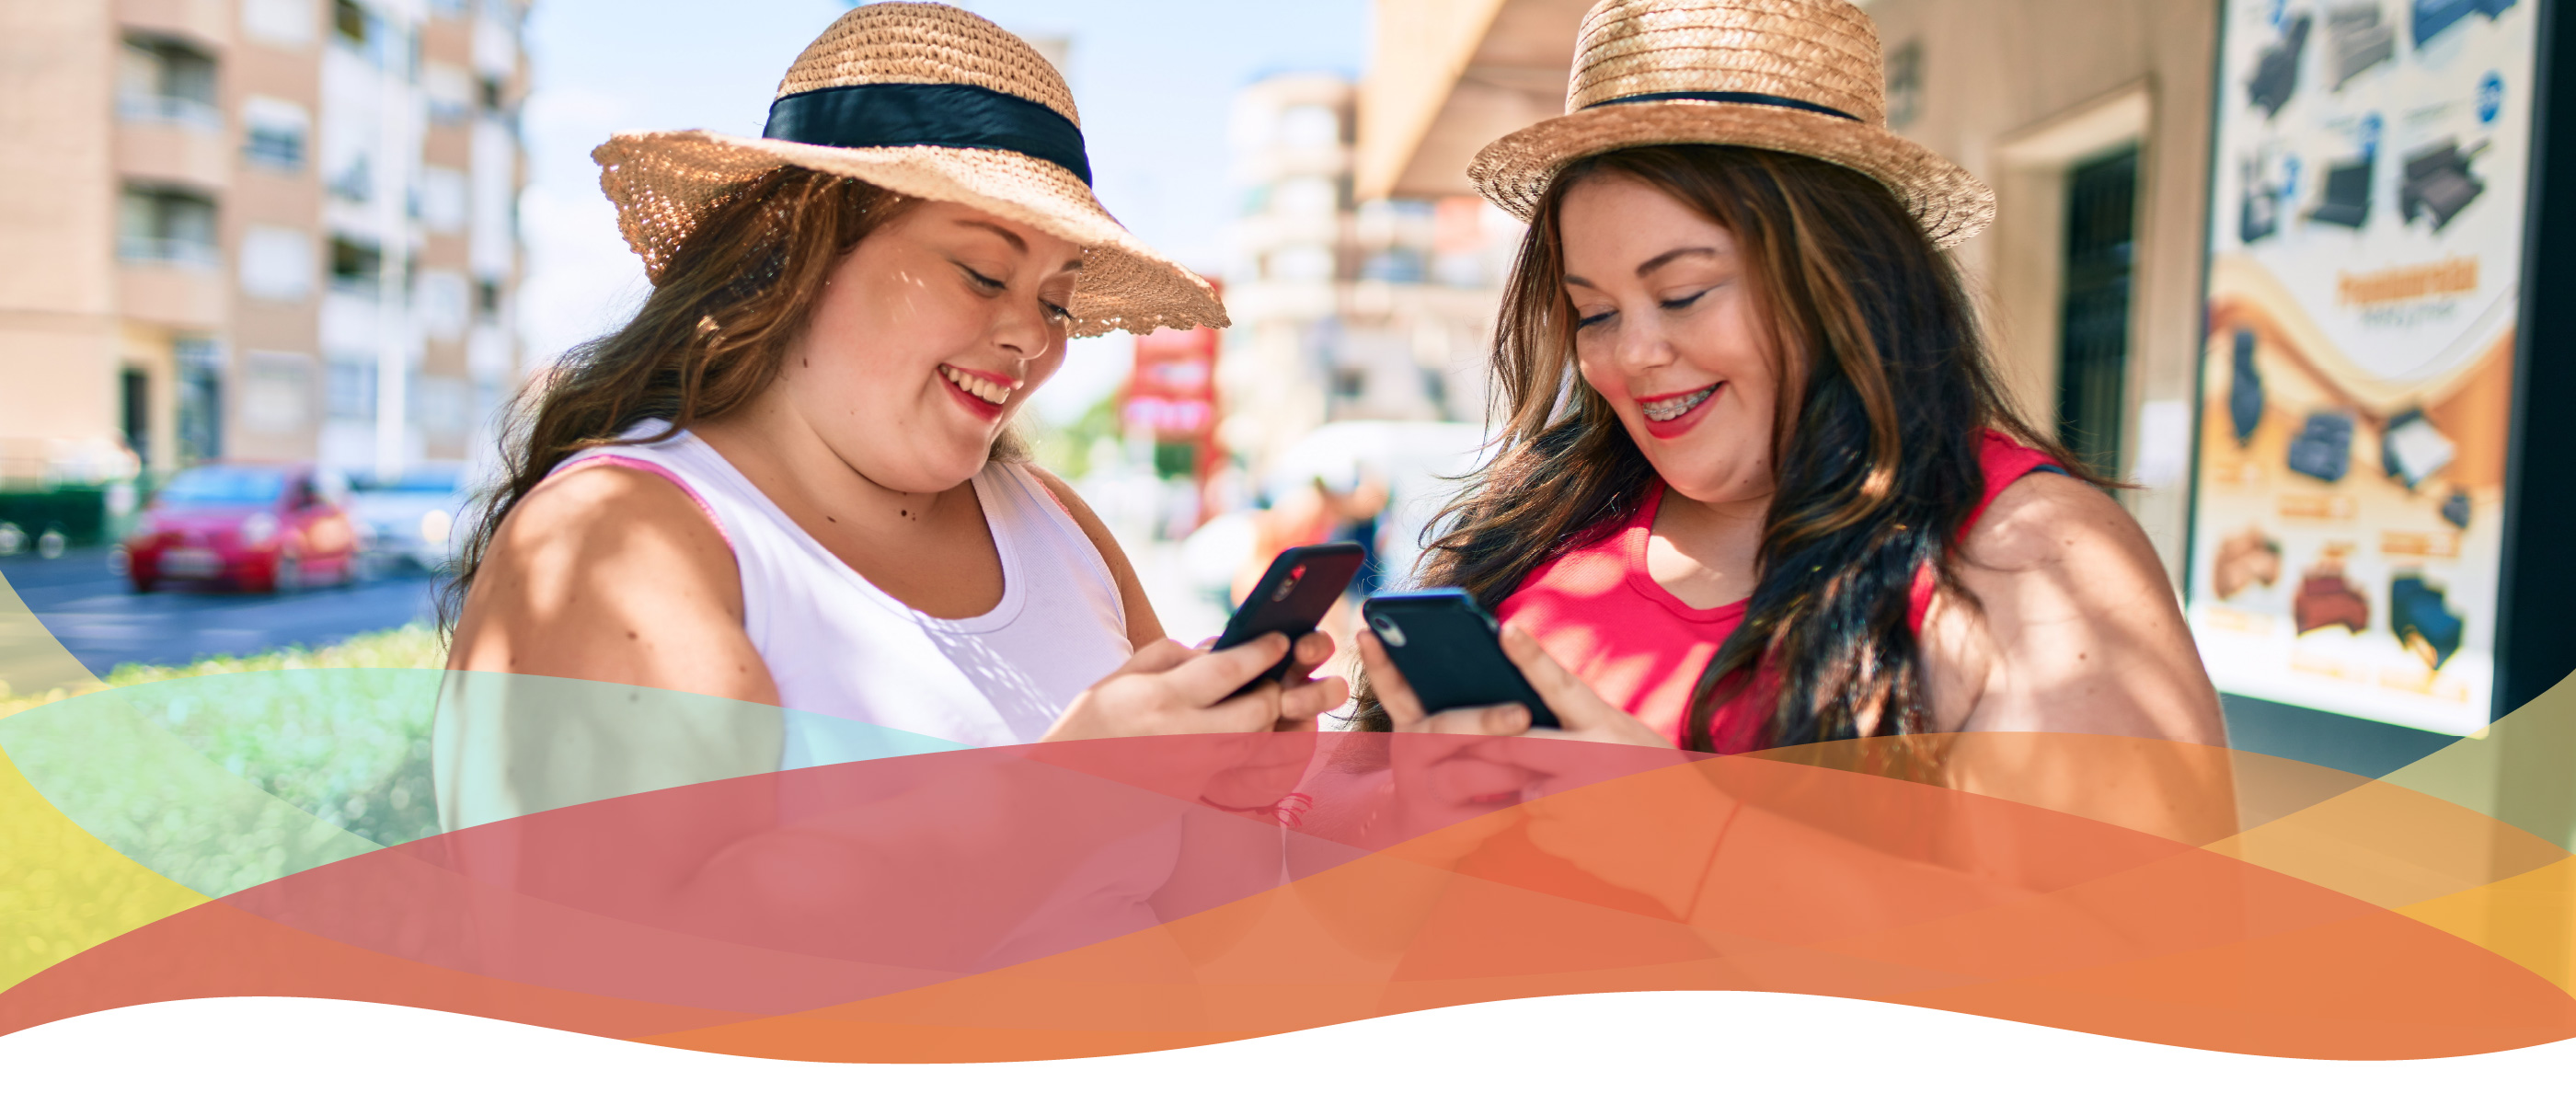 Two plus-sized twin sisters check their phones, outside.  Both are wearing straw hats, tank tops, white jeans, and big smiles.